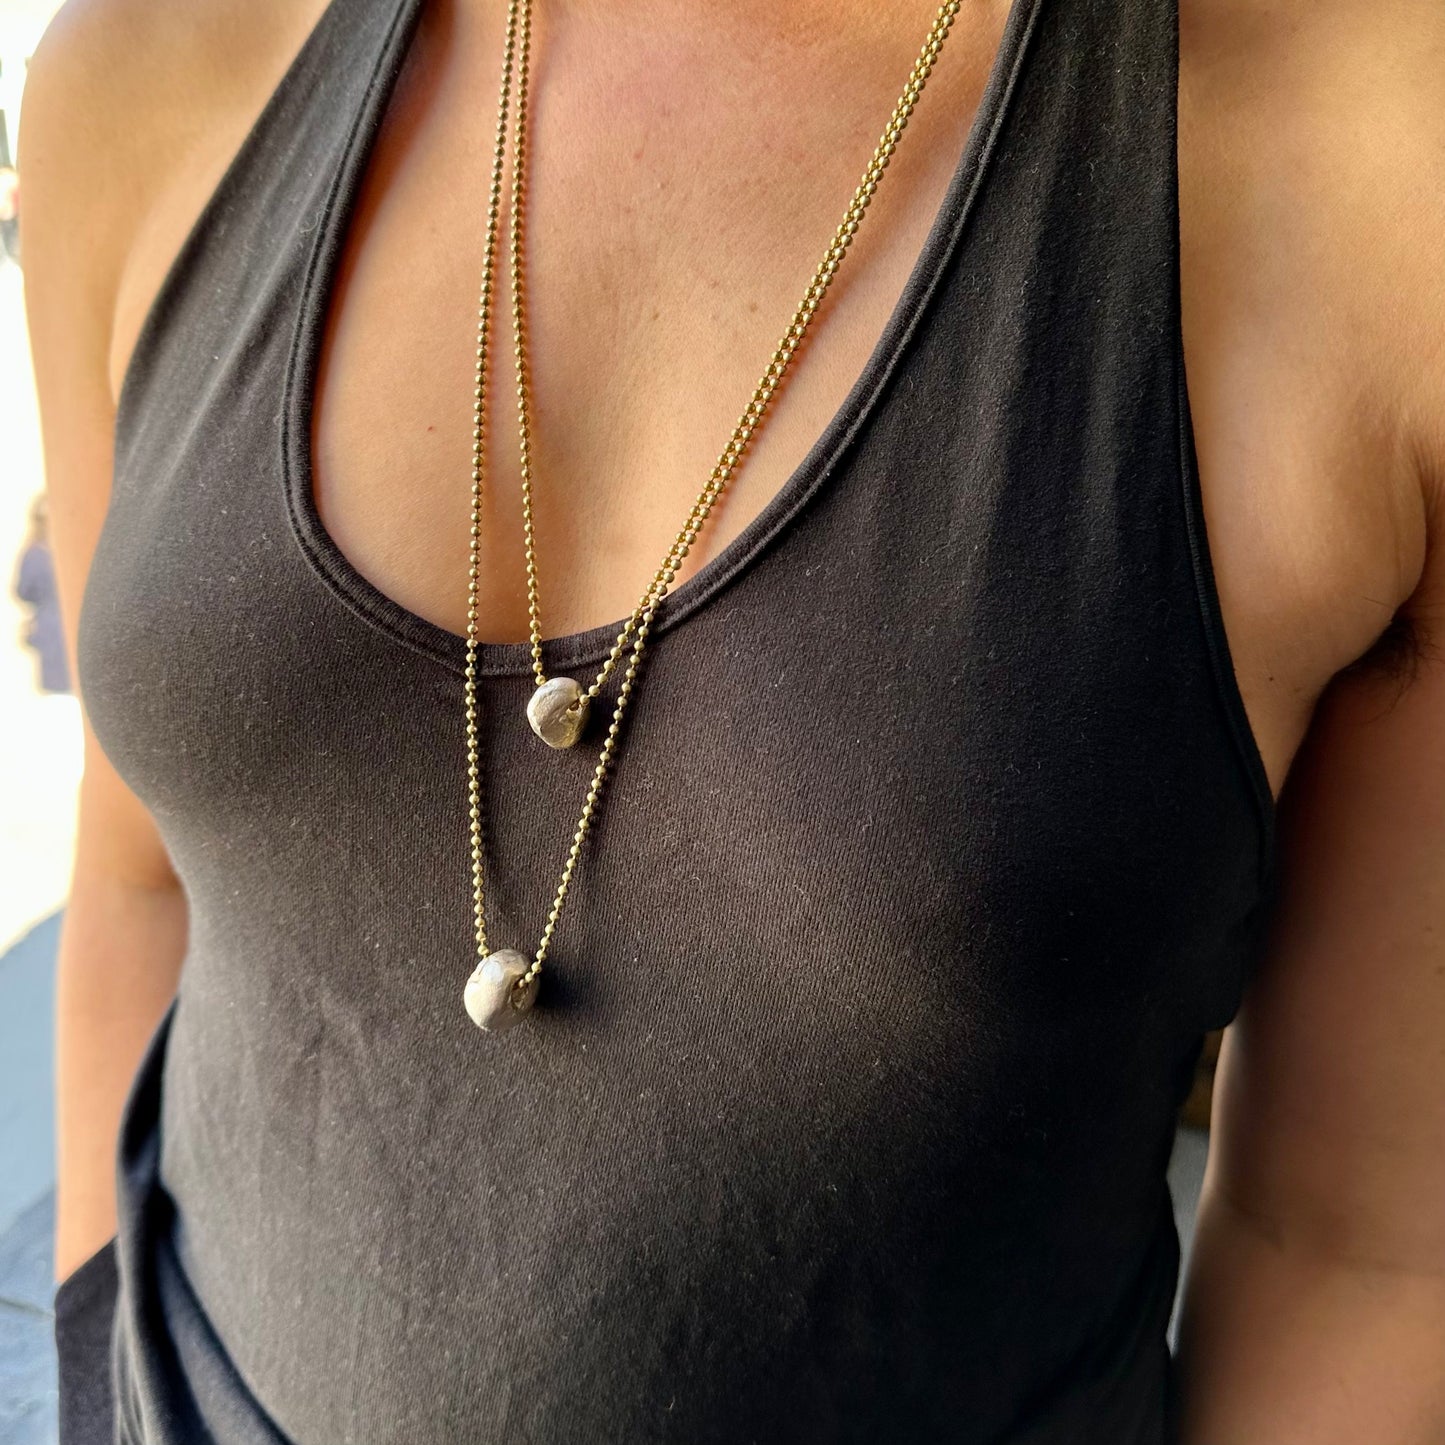 Solid silver hag stone pendants in two sizes, on brass chains, worn by a model.